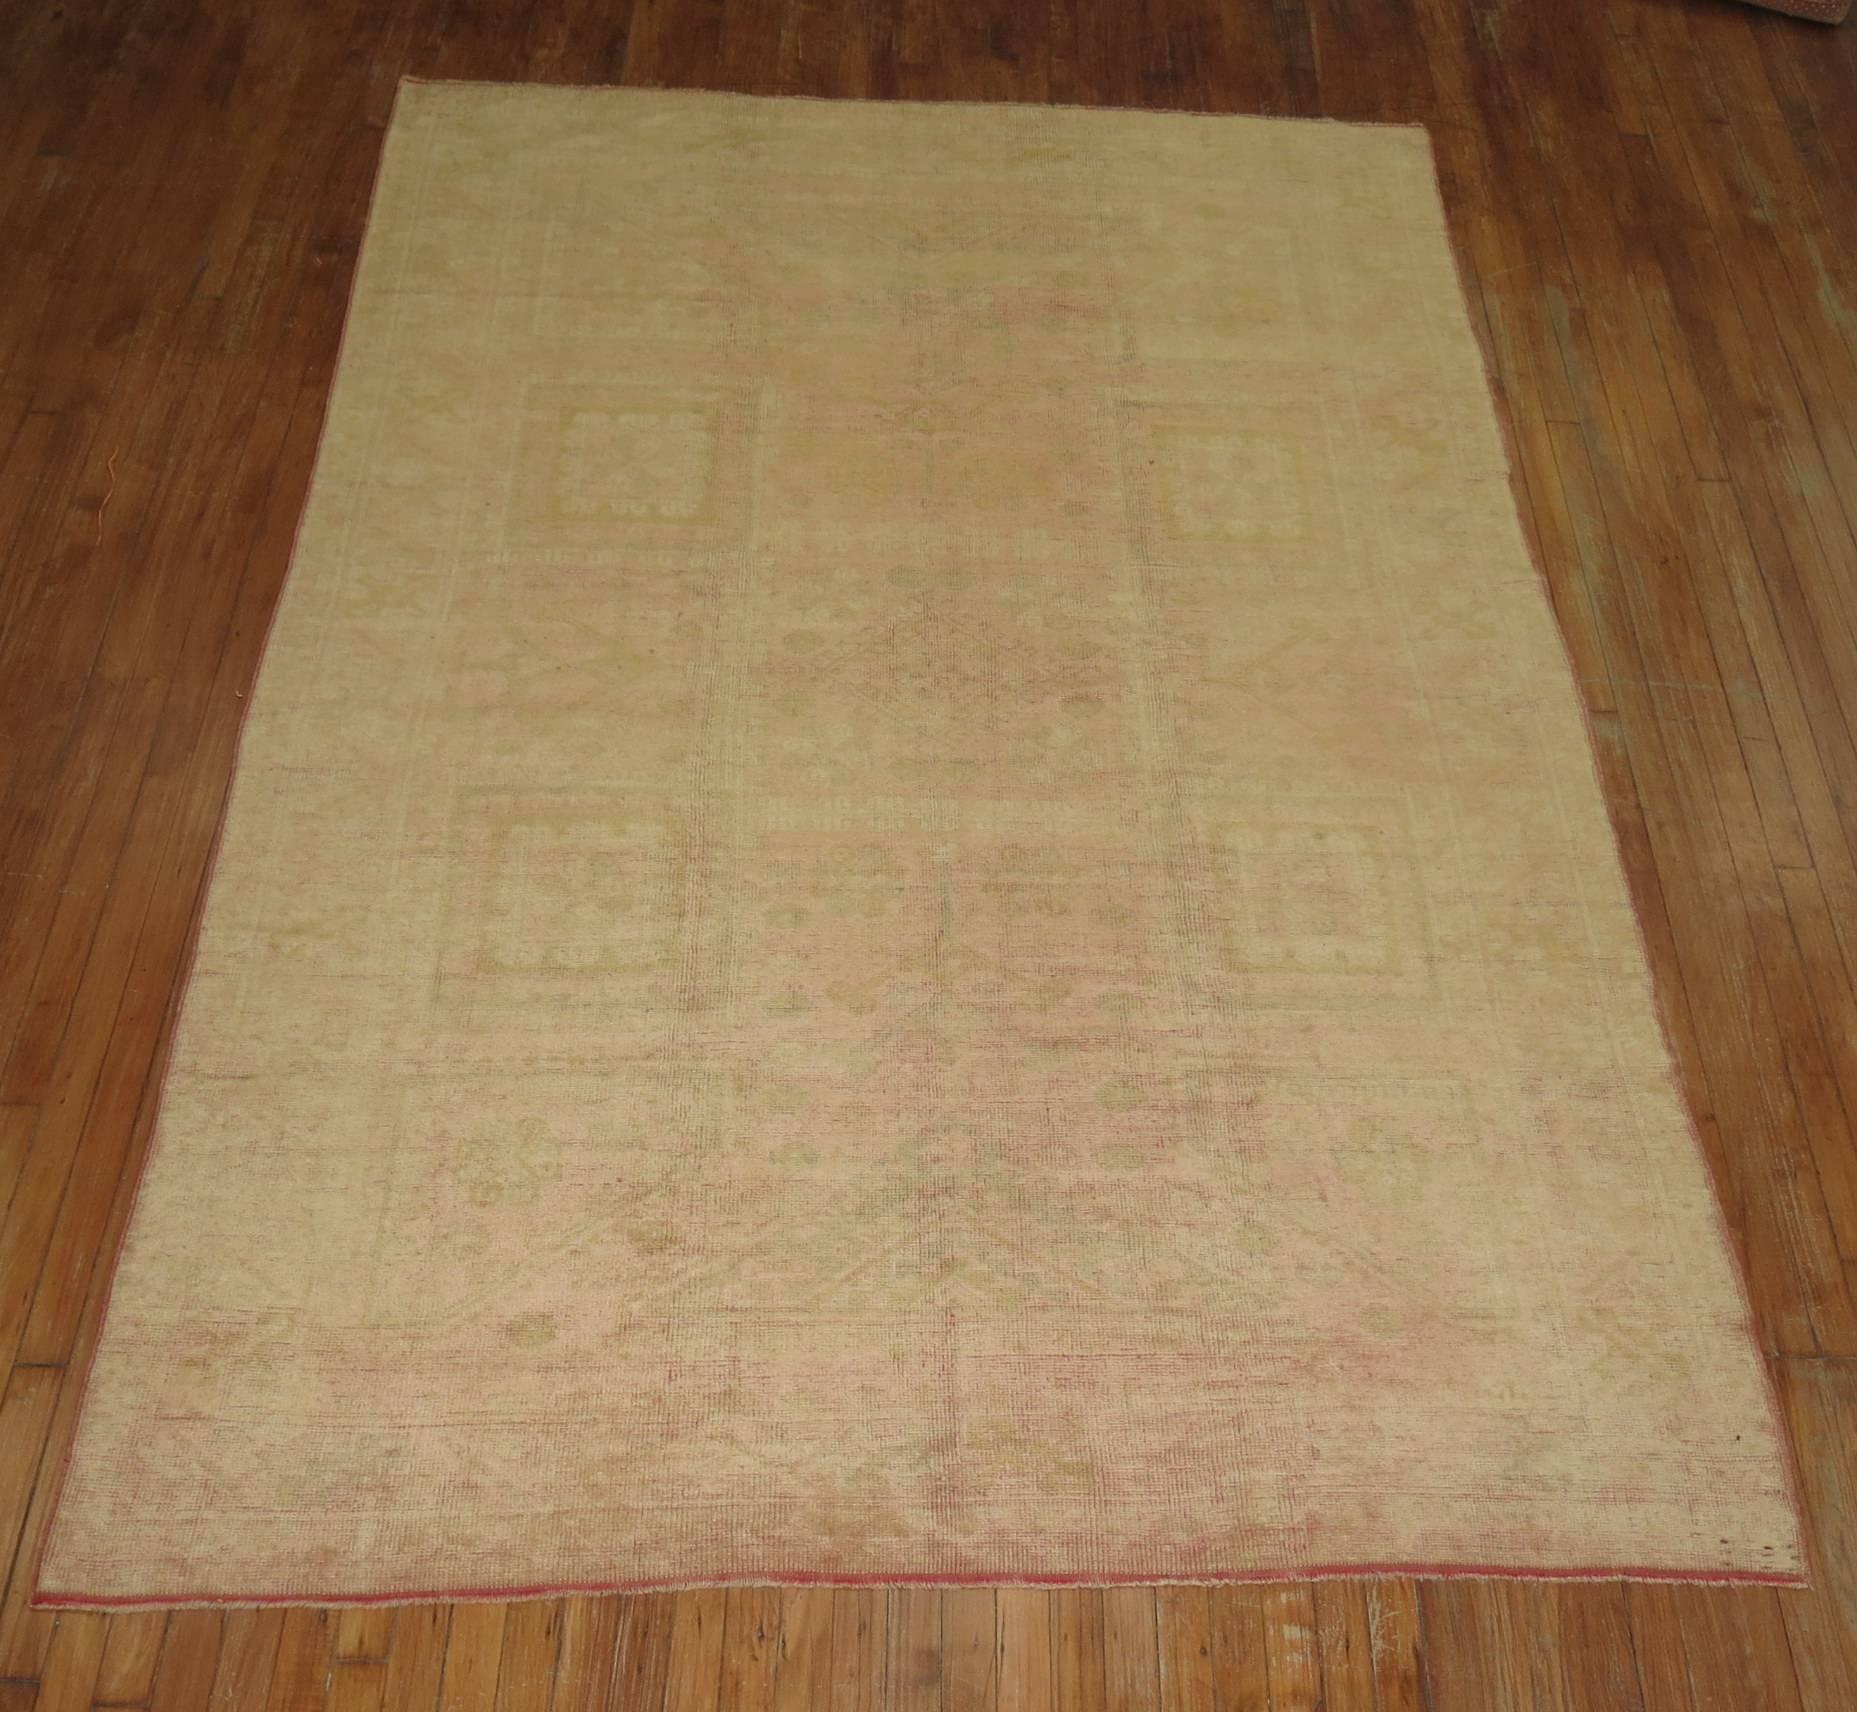 Mid-20th century Turkish Oushak rug in pale salmon and gold.

Size: 6'4” x 9'3”

Antique Turkish Oushak carpets such as these are desirable today as highly decorative pieces. They are notable for the grand, monumental scale of the designs, often